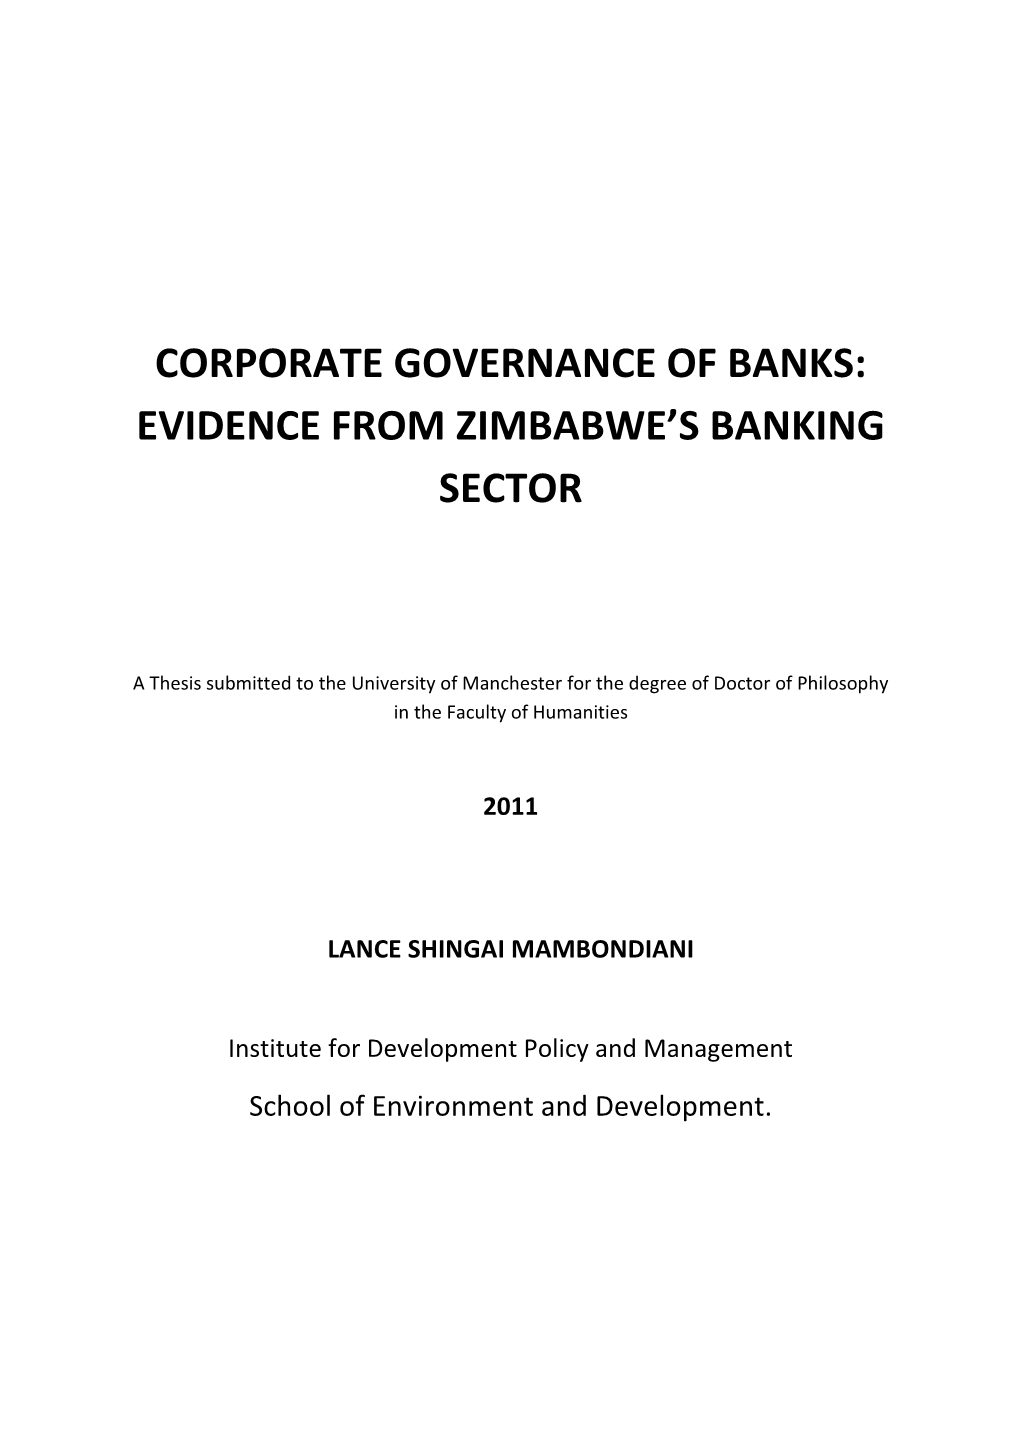 Corporate Governance of Banks: Evidence from Zimbabwe’S Banking Sector